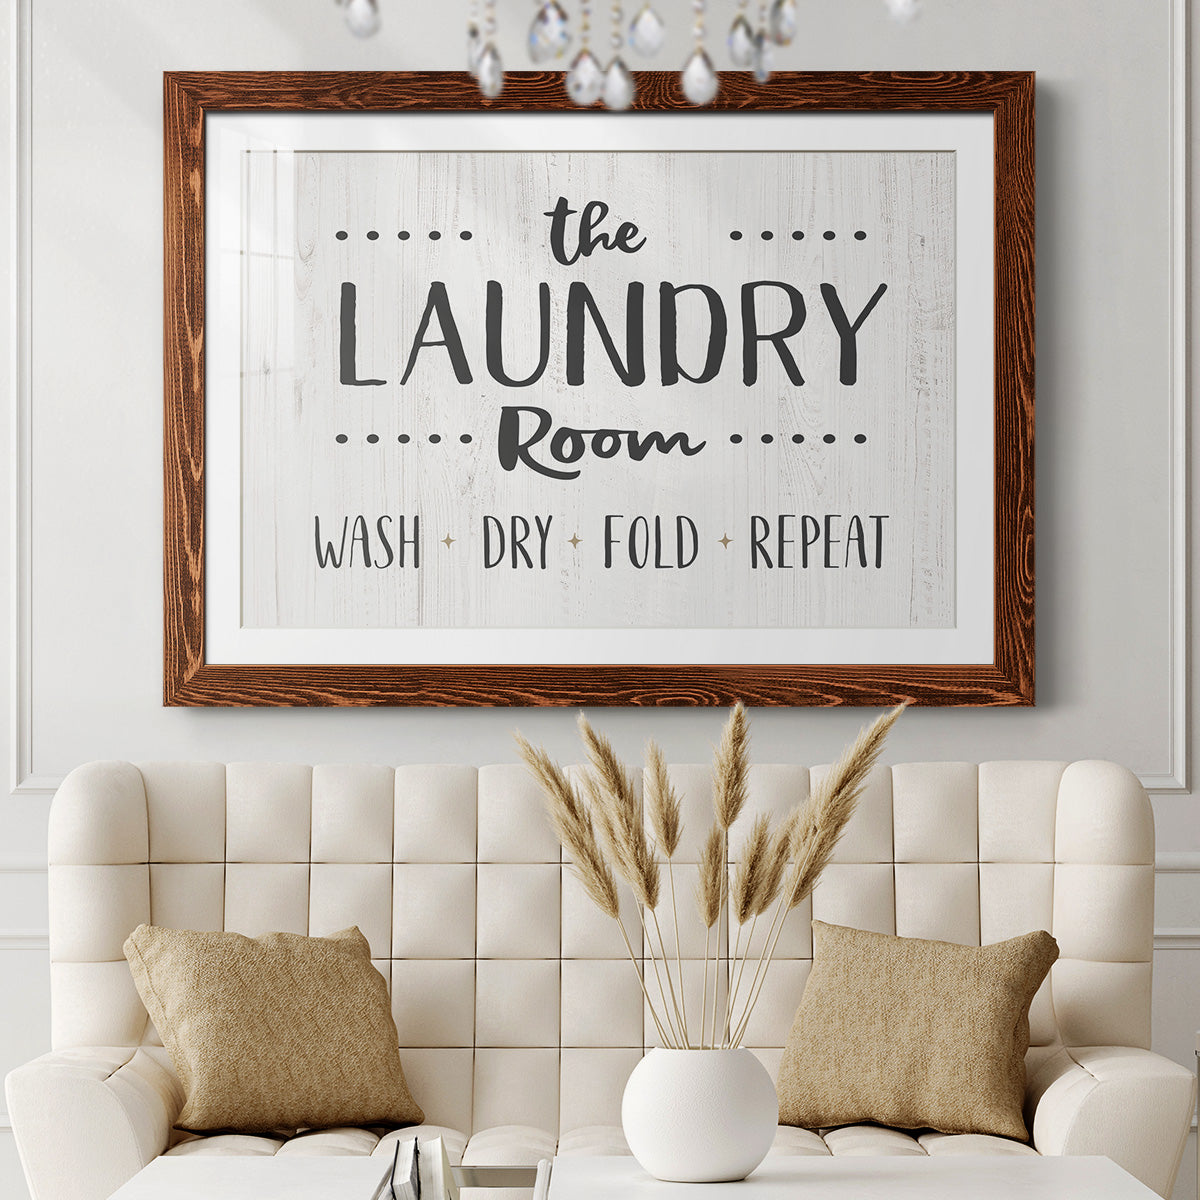 The Laundry Room-Premium Framed Print - Ready to Hang